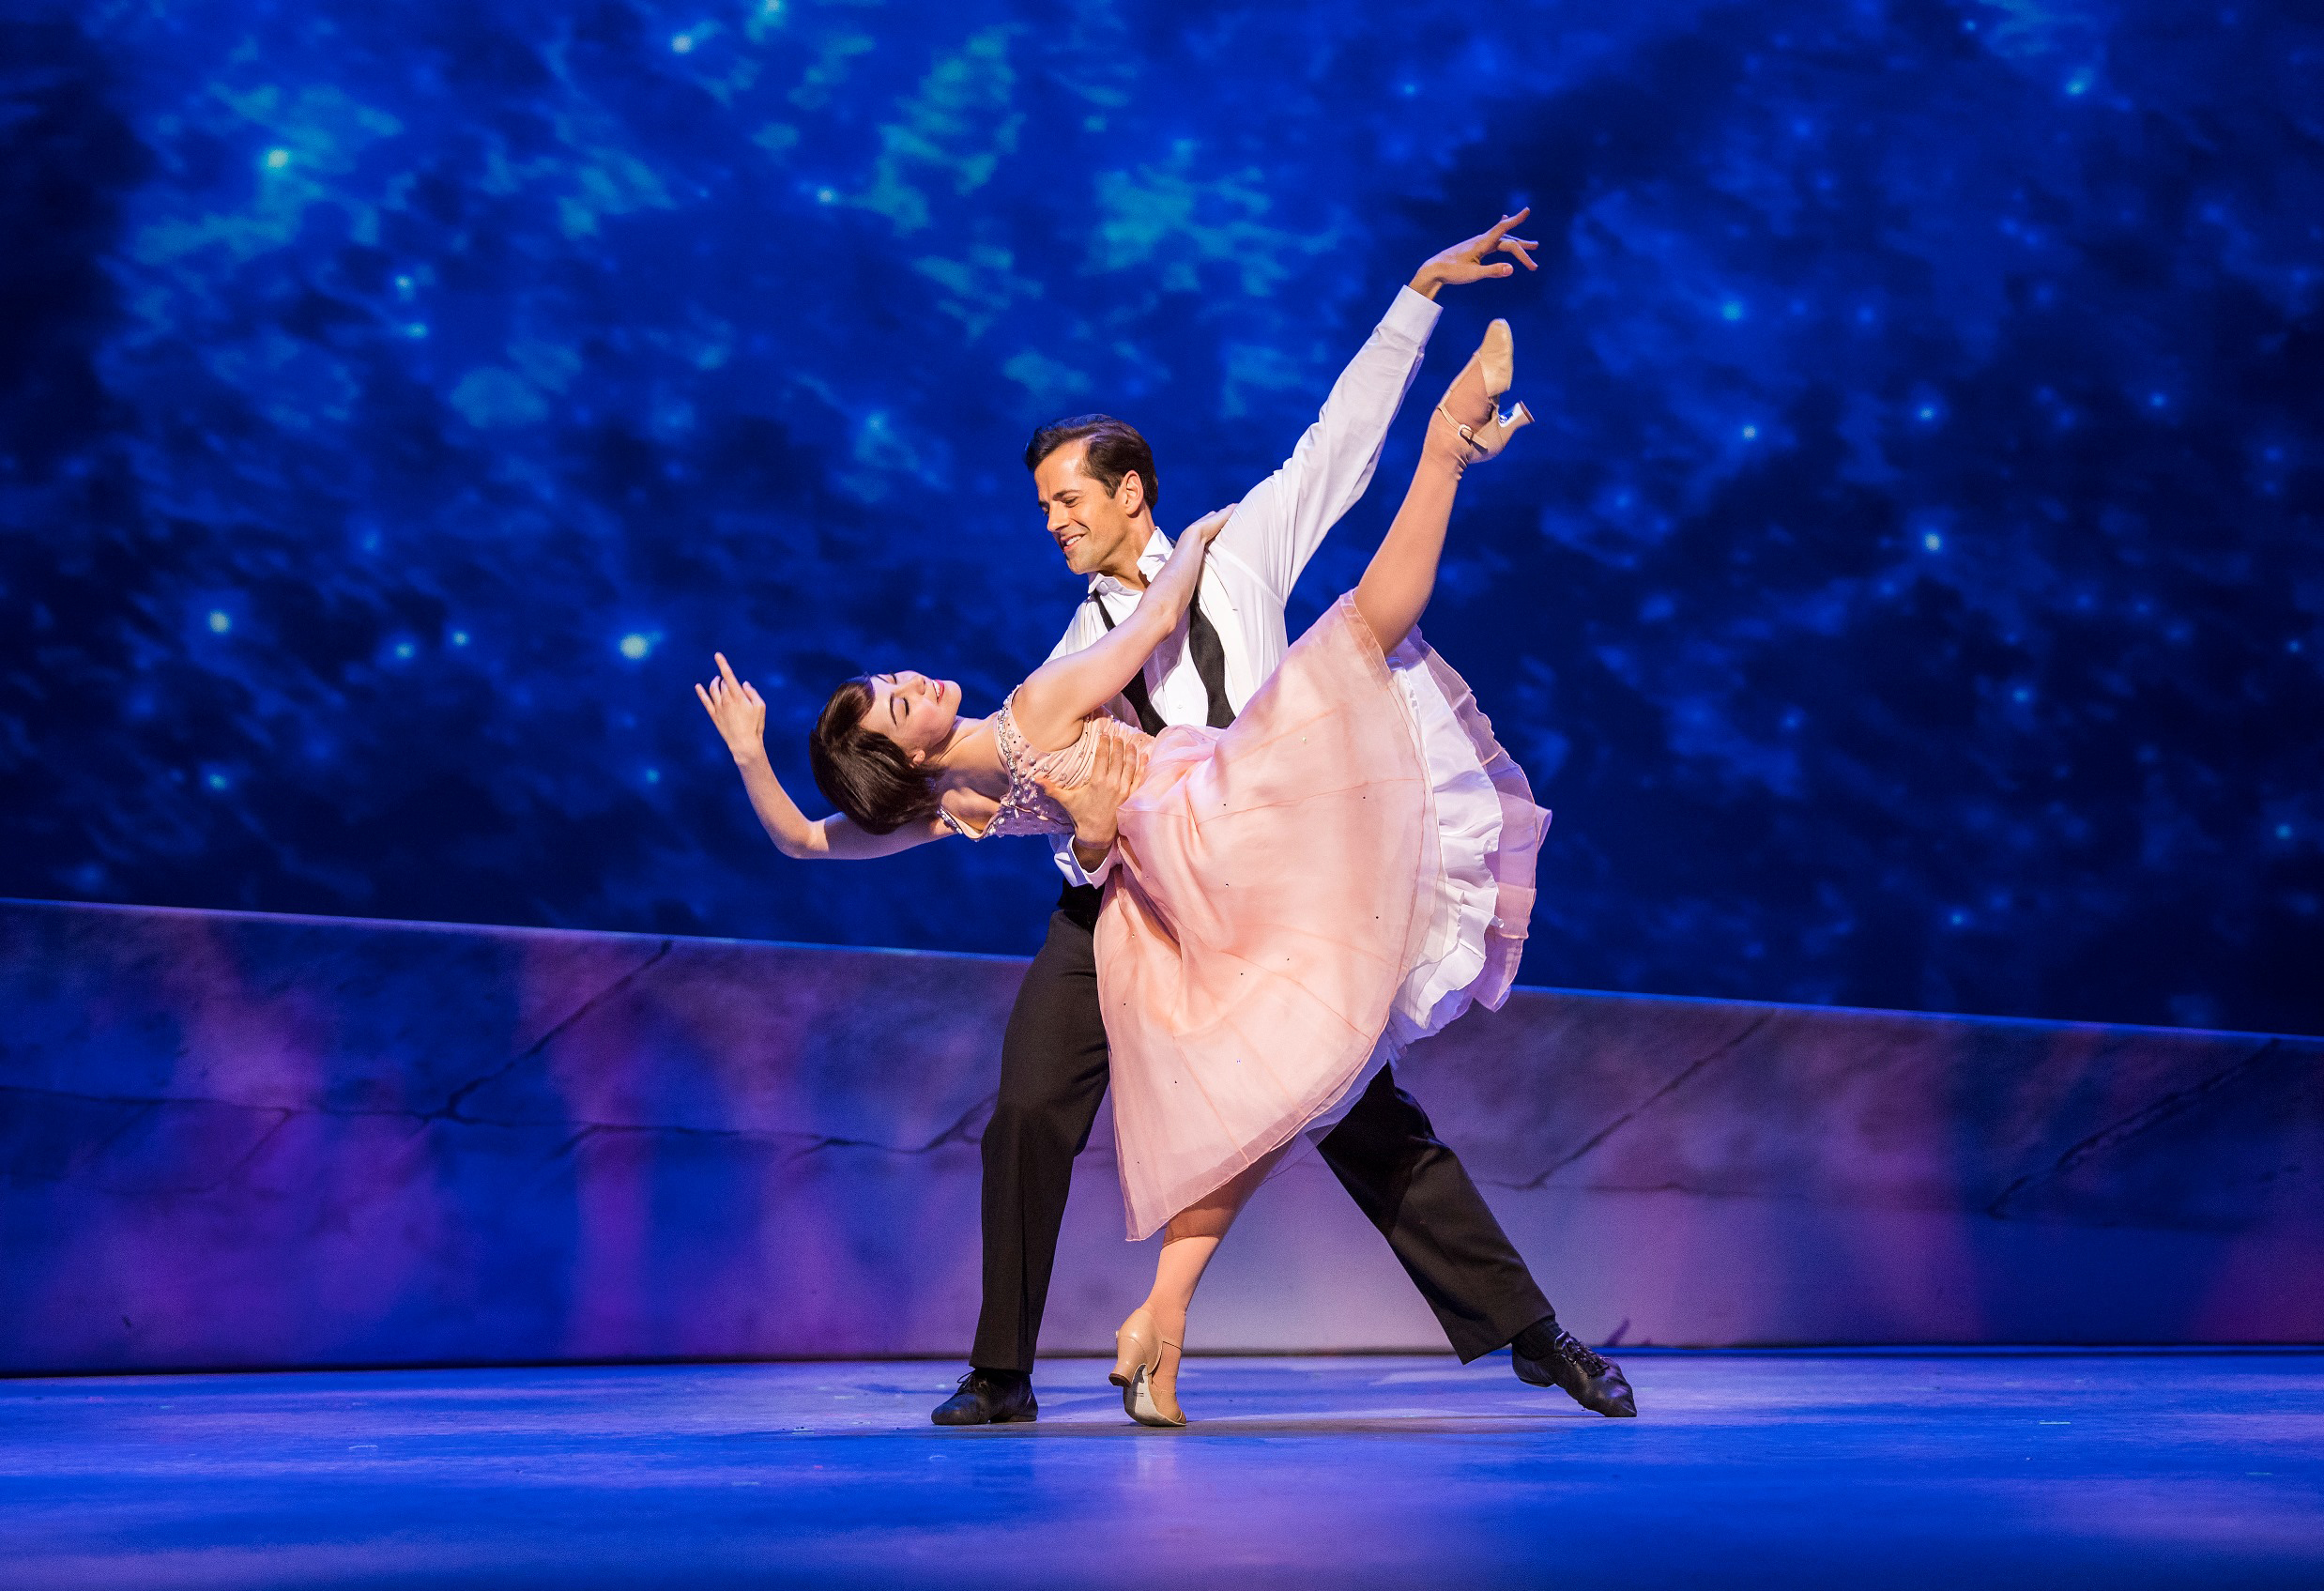 Robert Fairchild (Jerry Mulligan) and Leanne Cope (Lise Dassin) in An American In Paris by George and Ira Gershwin @ Dominion Theatre. Directed and Choreographed by Christopher Wheeldon. (Opening 21-03-17) ｩTristram Kenton 03-17 (3 Raveley Street, LONDON NW5 2HX TEL 0207 267 5550  Mob 07973 617 355)email: tristram@tristramkenton.com